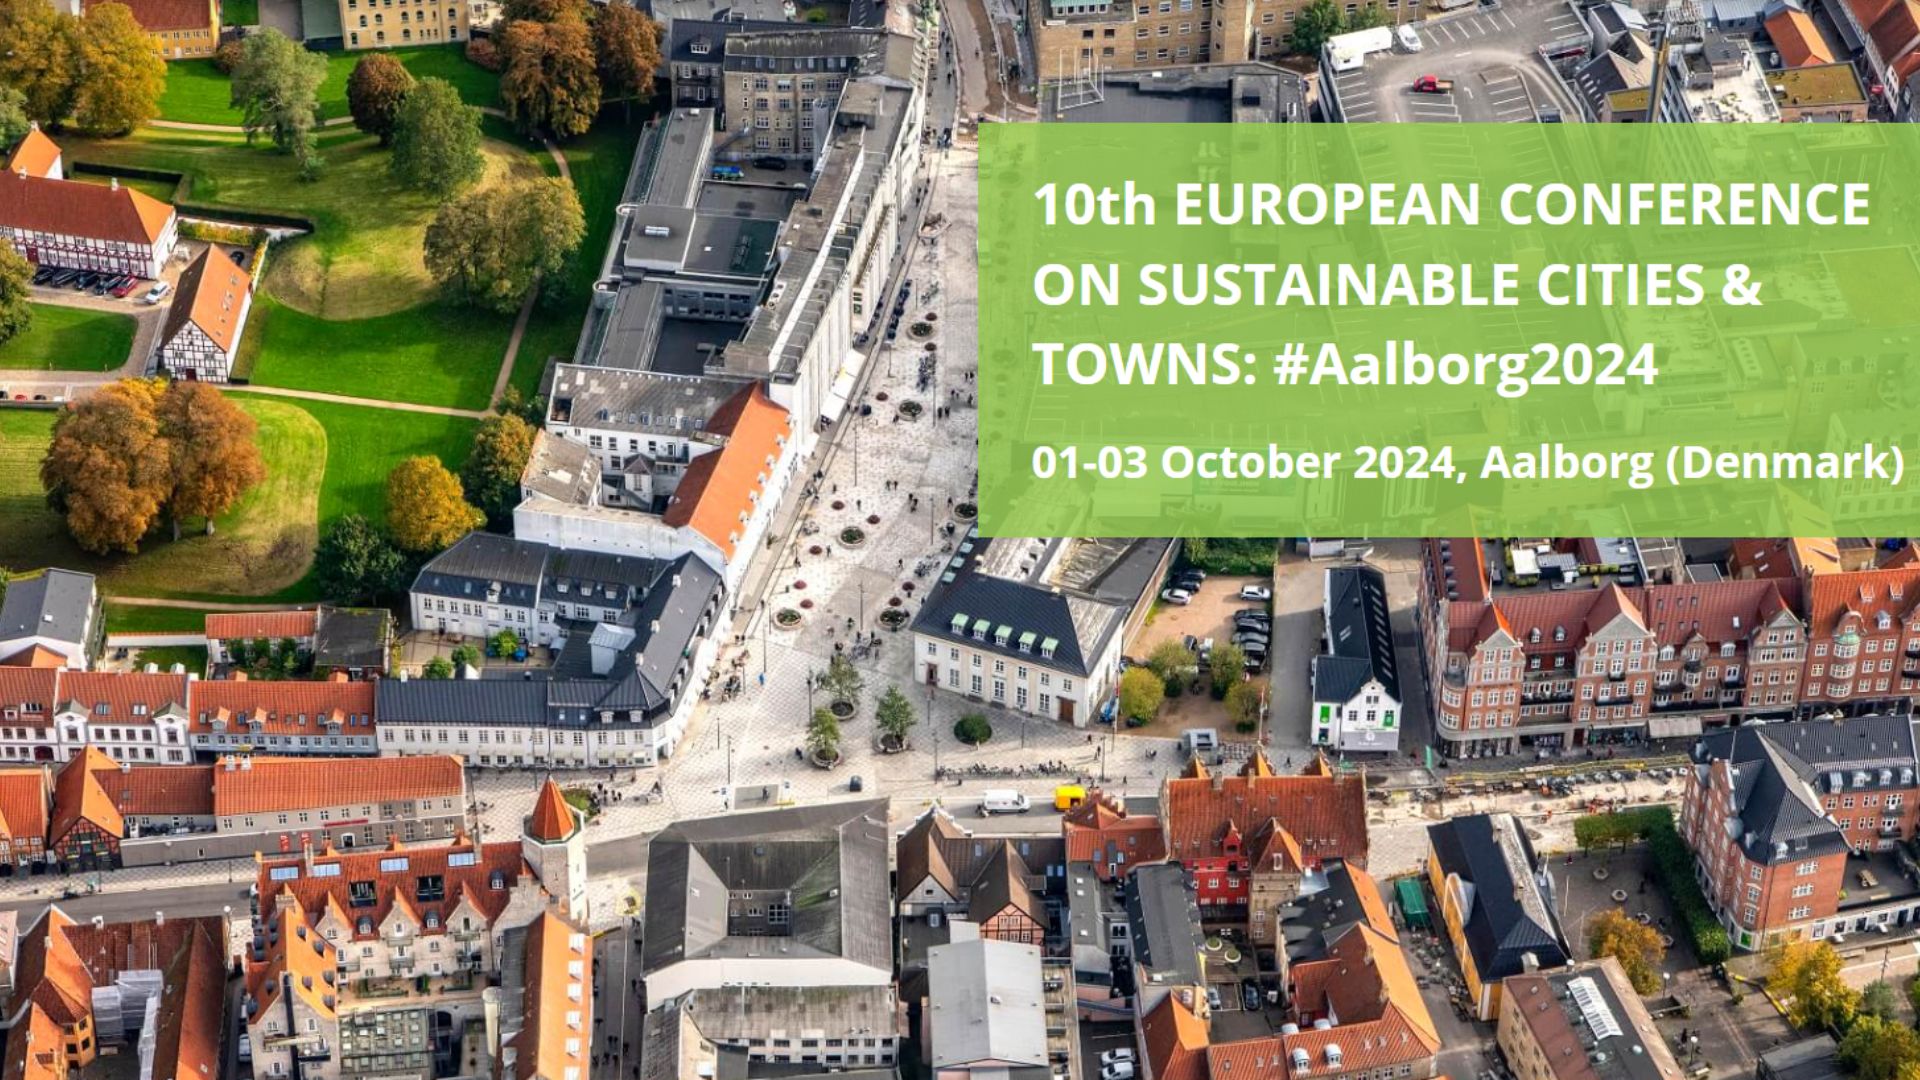 10th EUROPEAN CONFERENCE ON SUSTAINABLE CITIES & TOWNS: Aalborg 2024